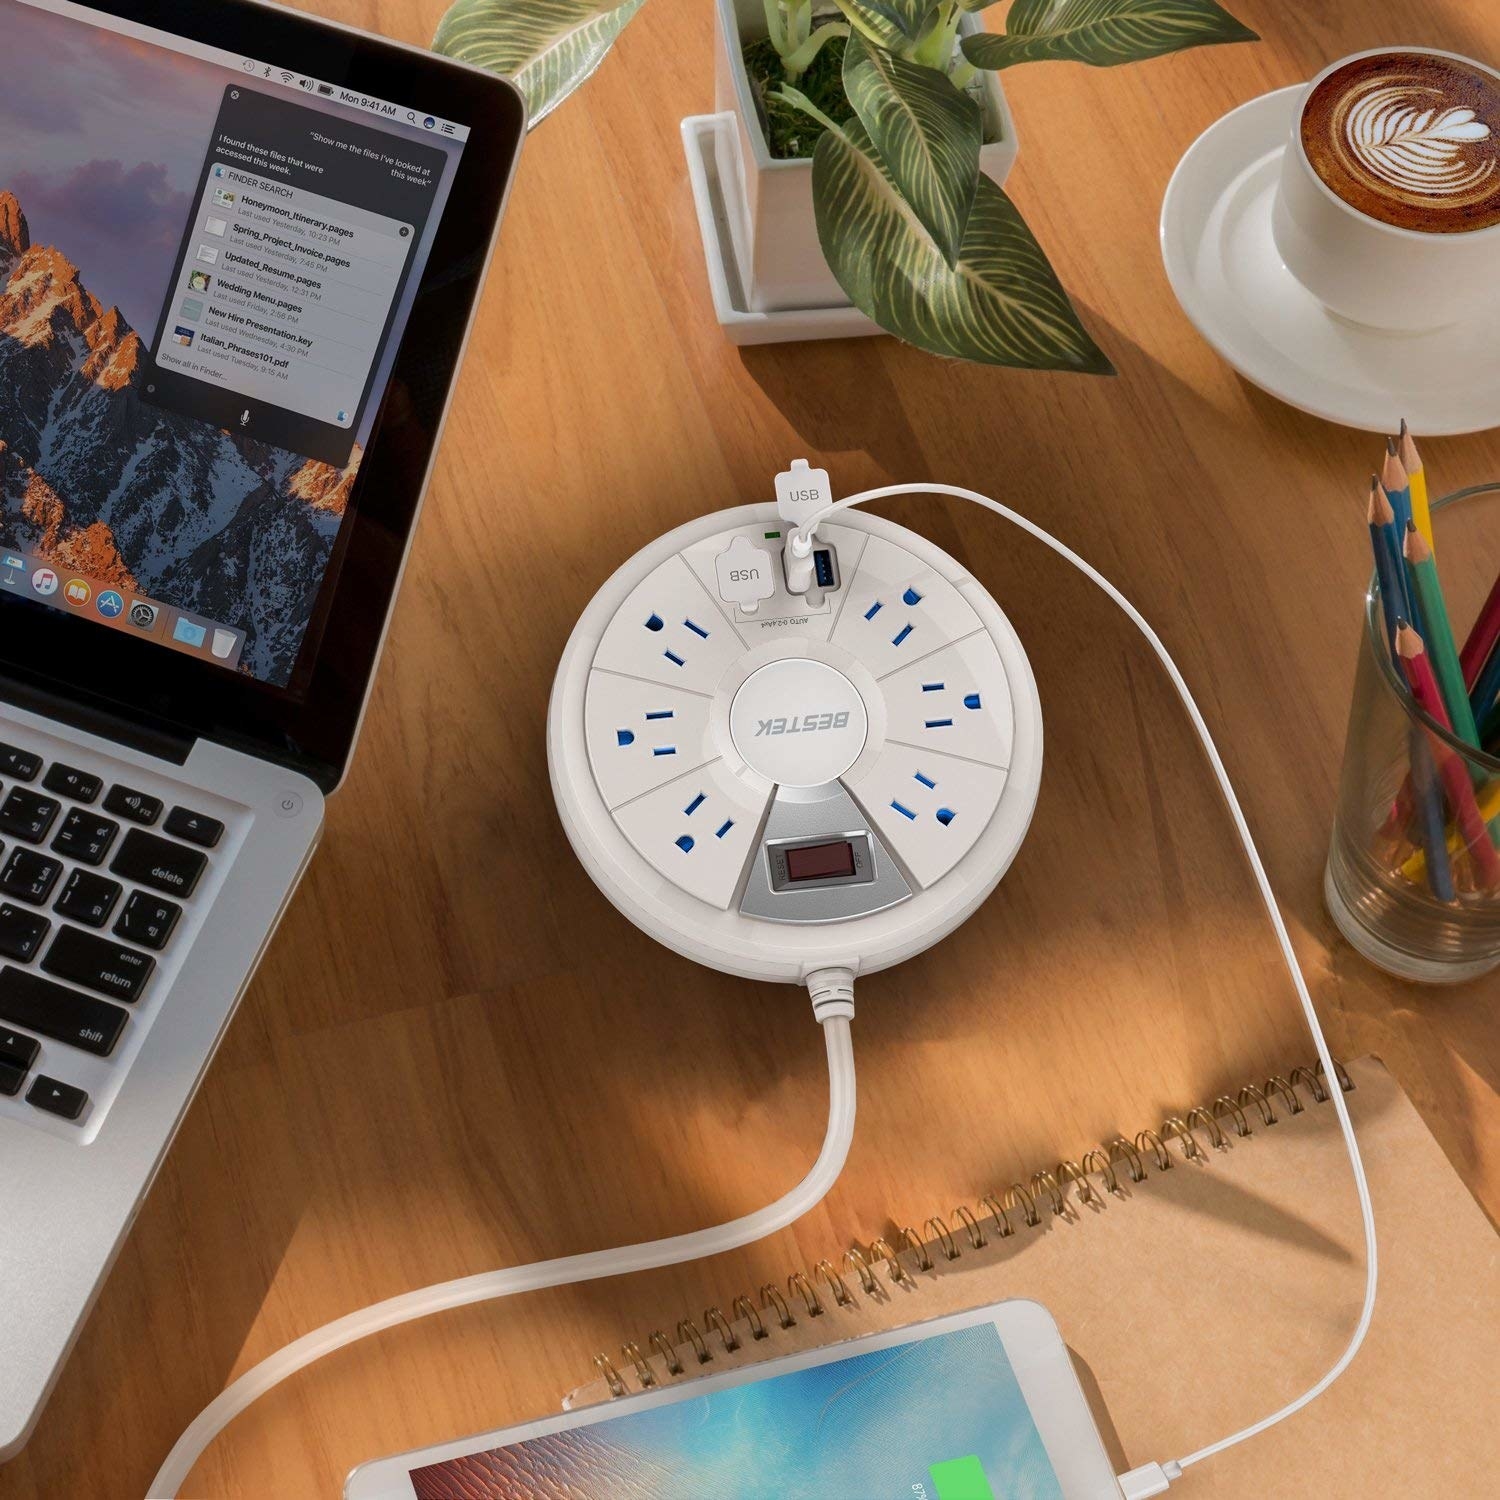 the white circular power strip, which has six outlets and two USB ports